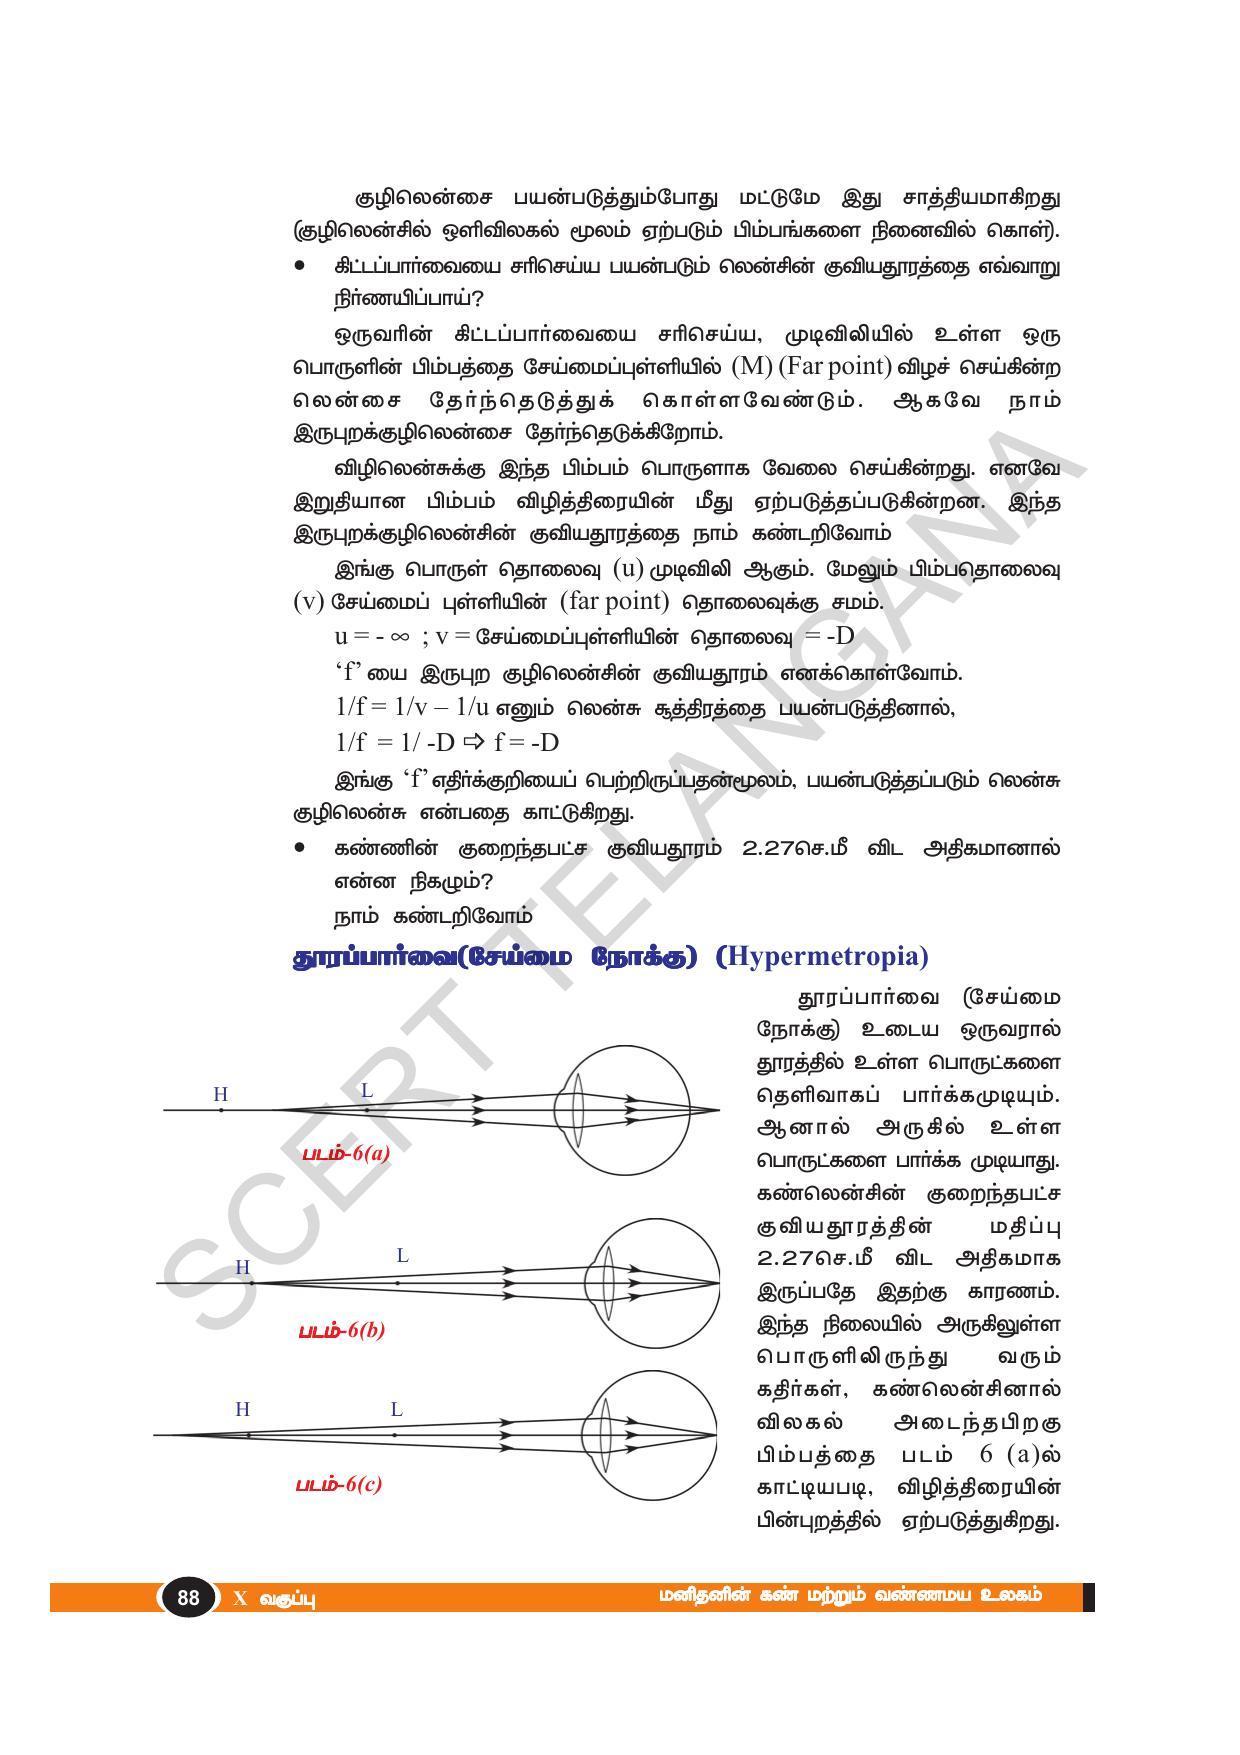 TS SCERT Class 10 Physical Science(Tamil Medium) Text Book - Page 100